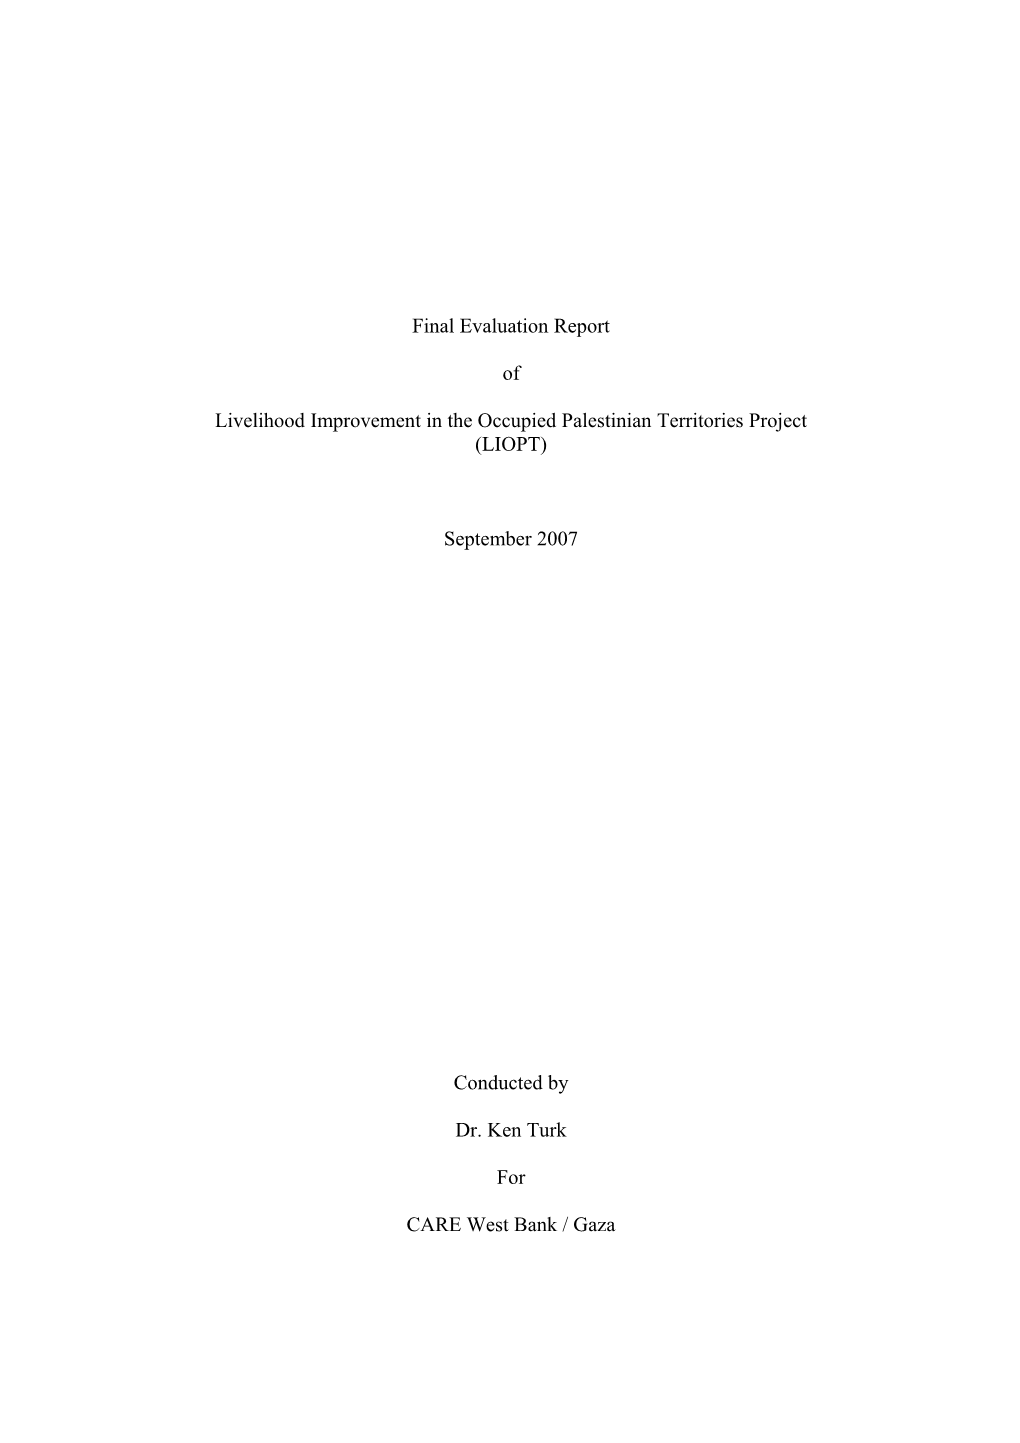 Final Evaluation Report of Livelihood Improvement in the Occupied Palestininian Territories